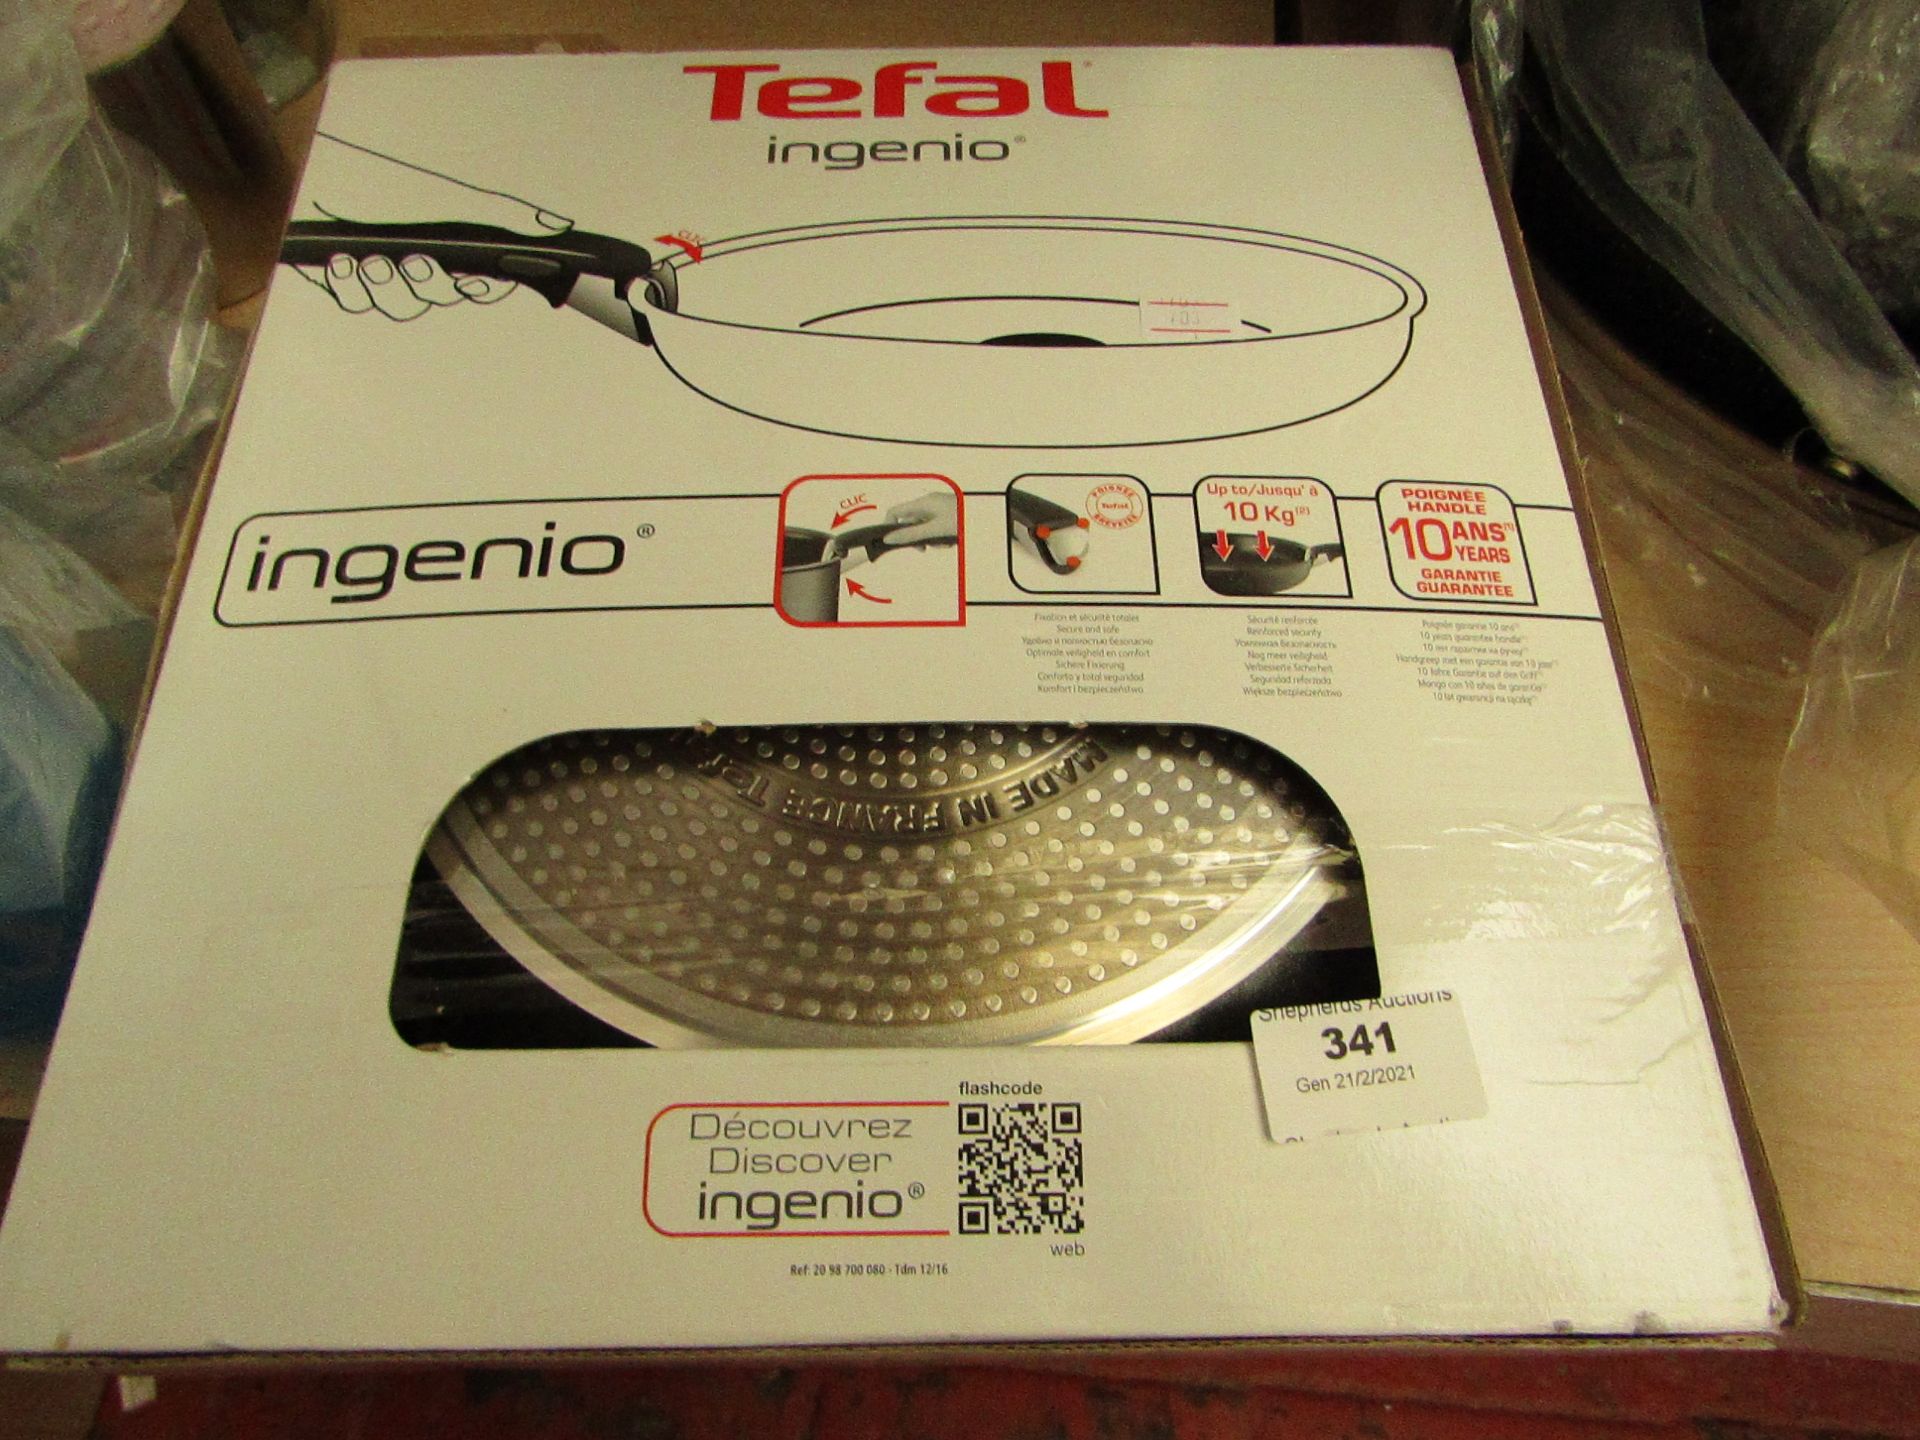 Tefal Ingenio Expertise 2x frying pan & 1x attachable handle - Boxed & Unchecked